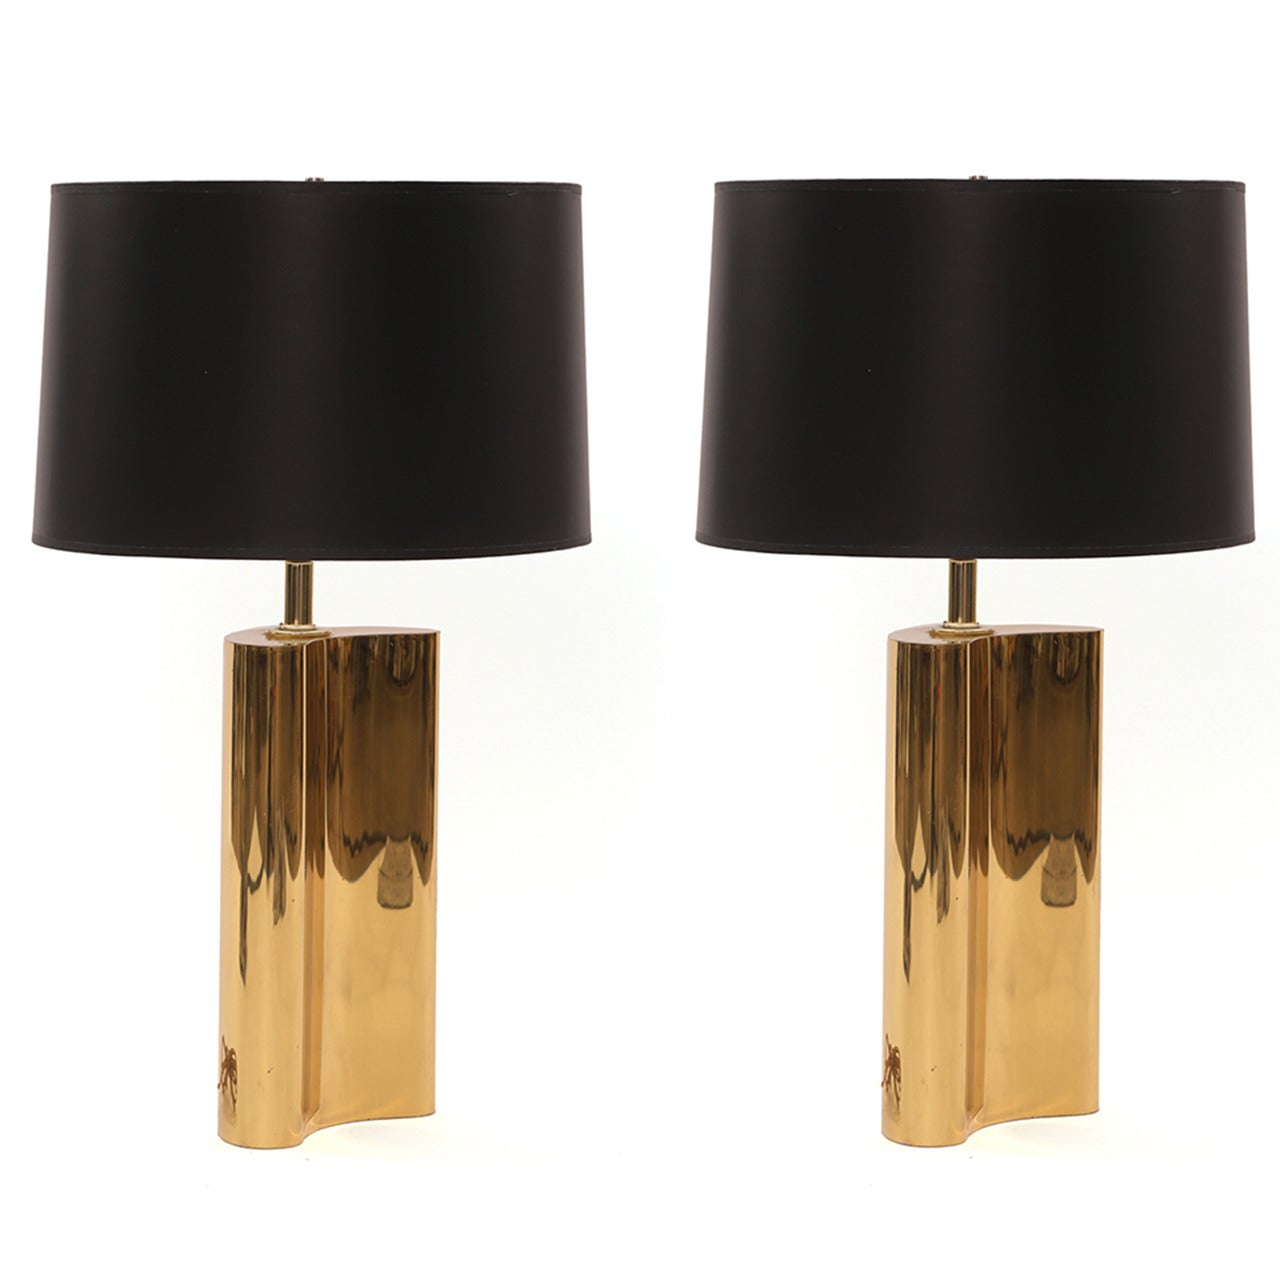 Pair of Free-Form Polished Brass Table Lamps